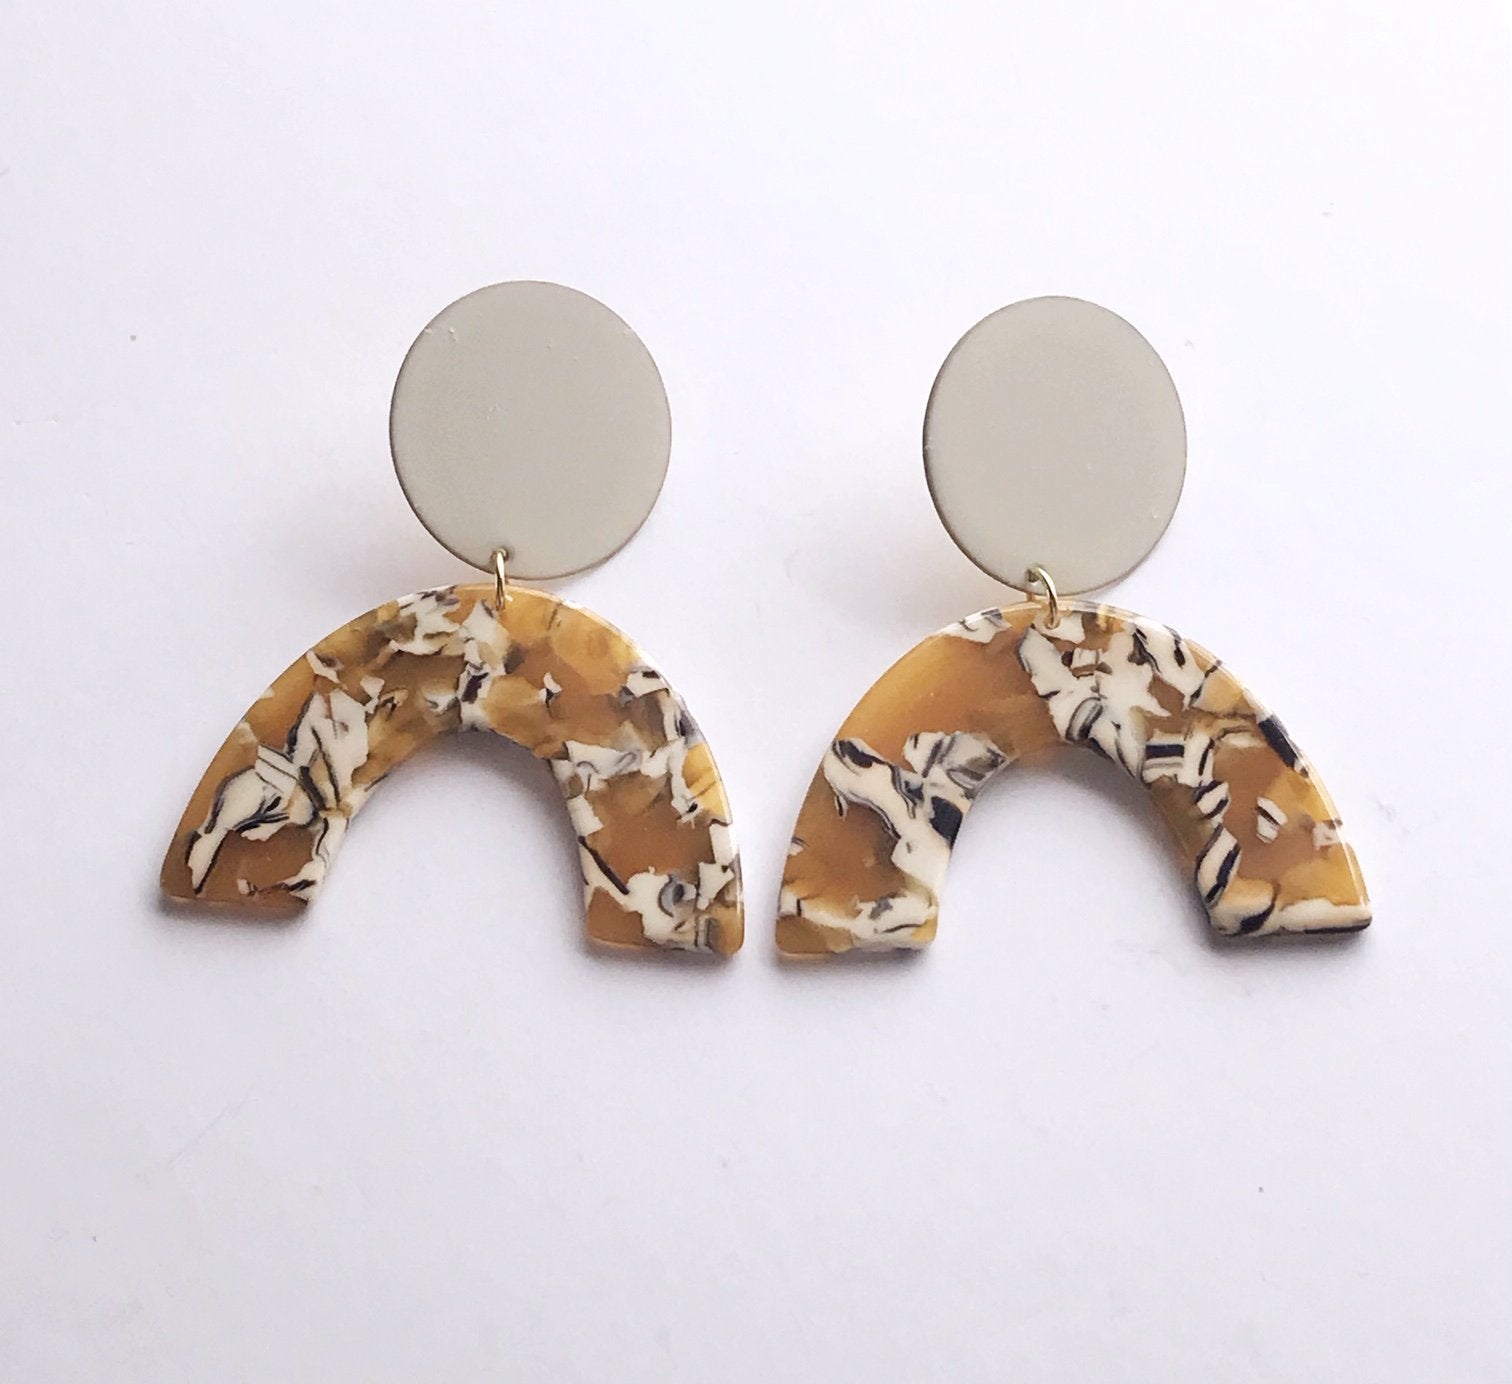 Ivory and Mustard Safari Earrings - Handcrafted Statement Jewelry - Jewelry & Watches - Bijou Her -  -  - 